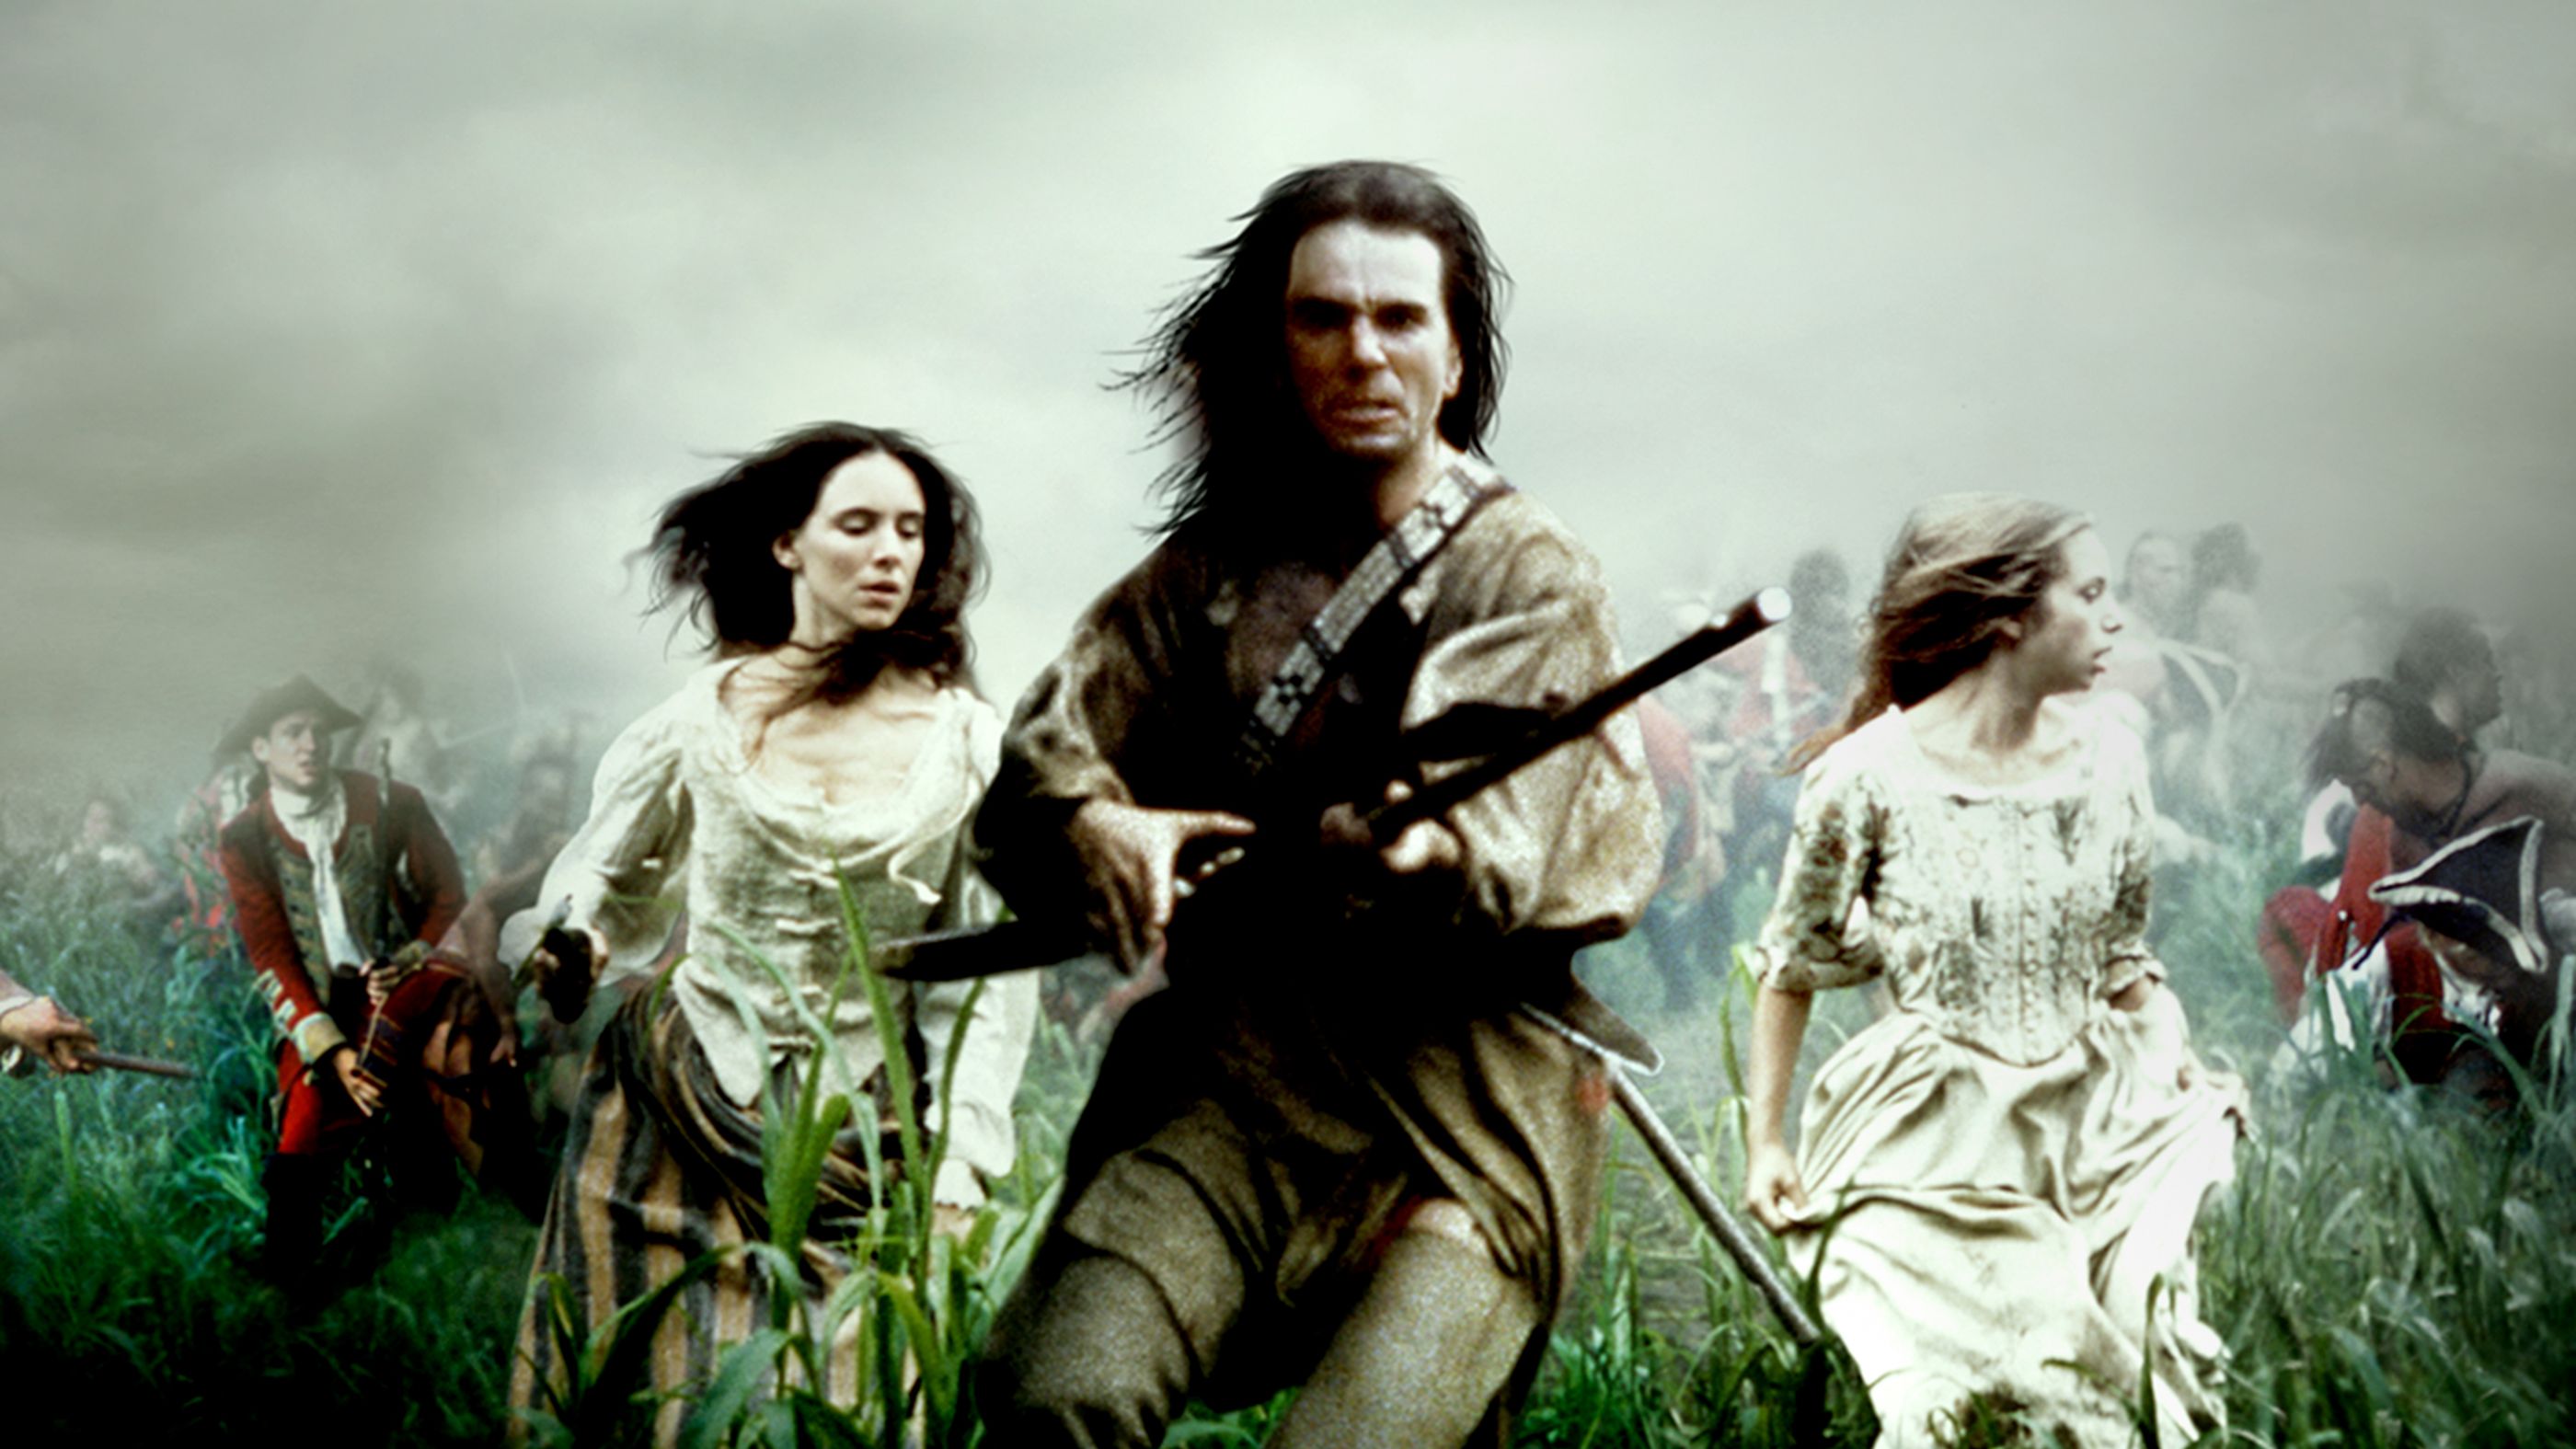 the last of the mohicans movie summary